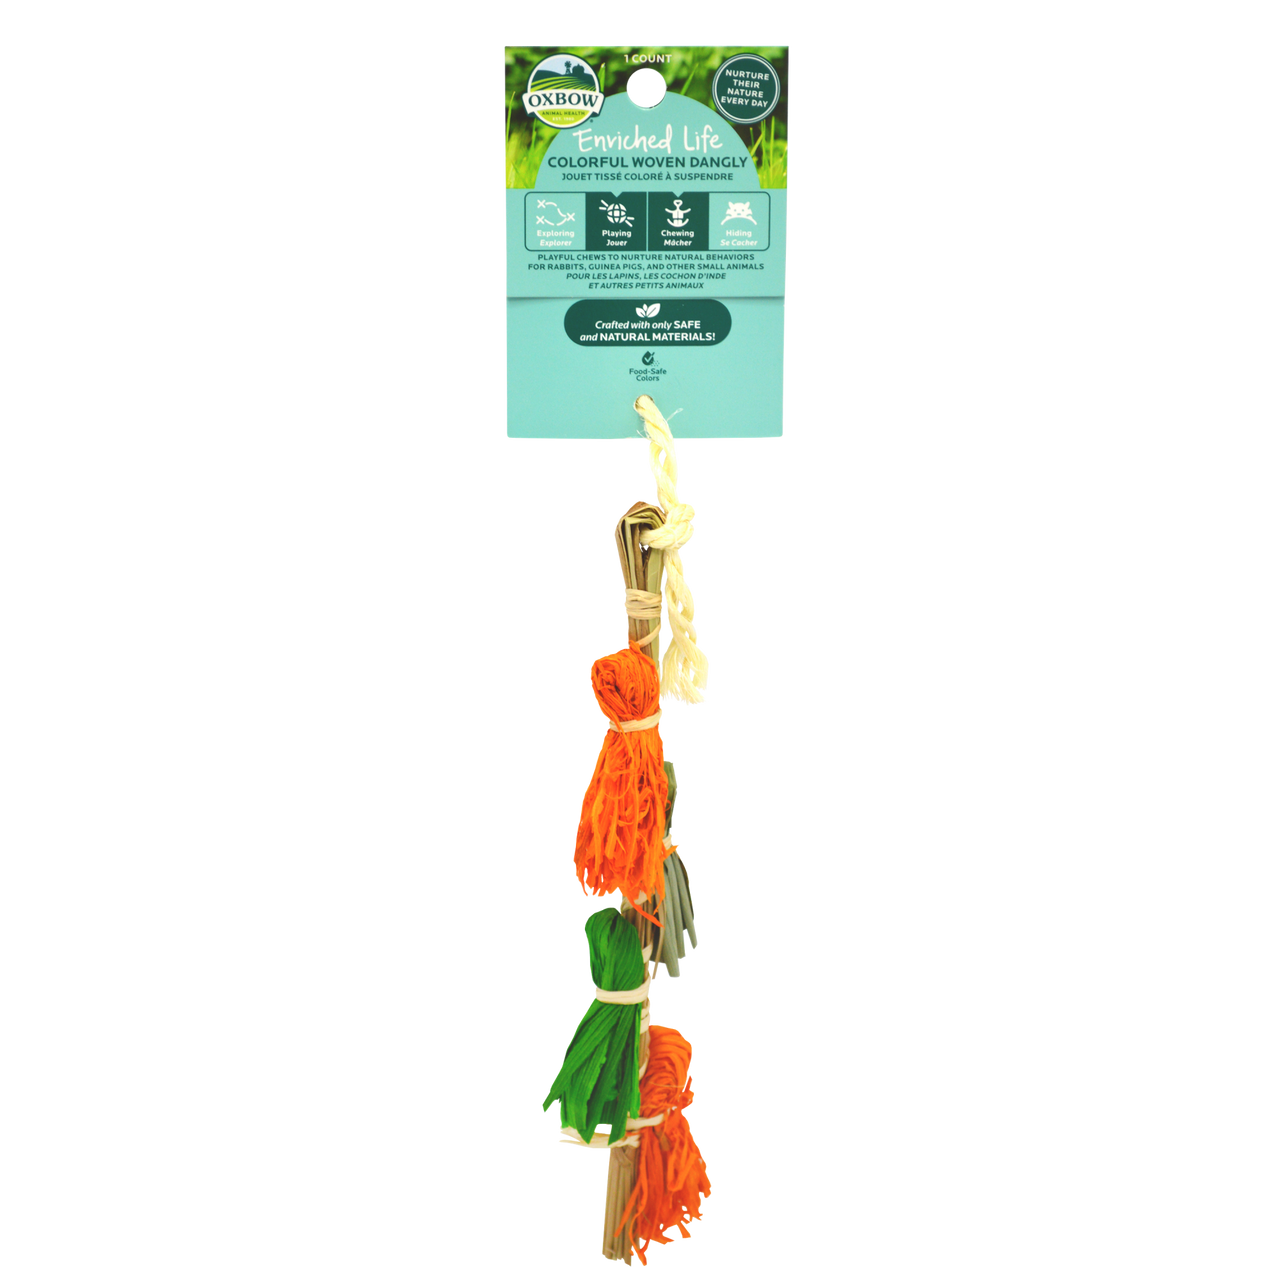 Oxbow Animal Health Enriched Life Colorful Woven Dangly Small Animal Chew One Size